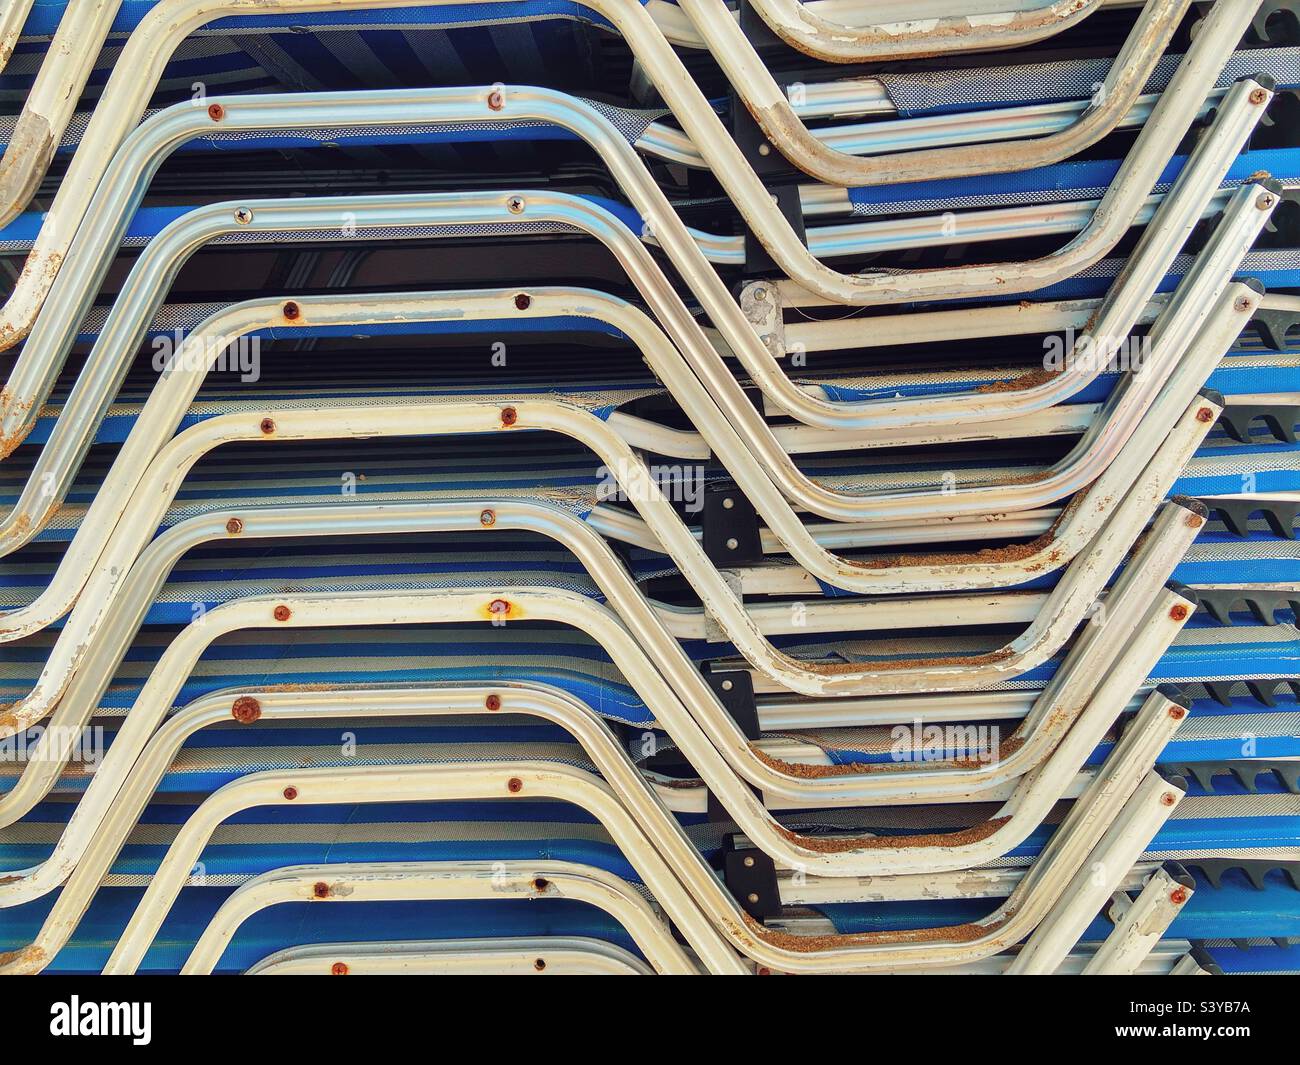 Stacked sun beds at end of the season Stock Photo